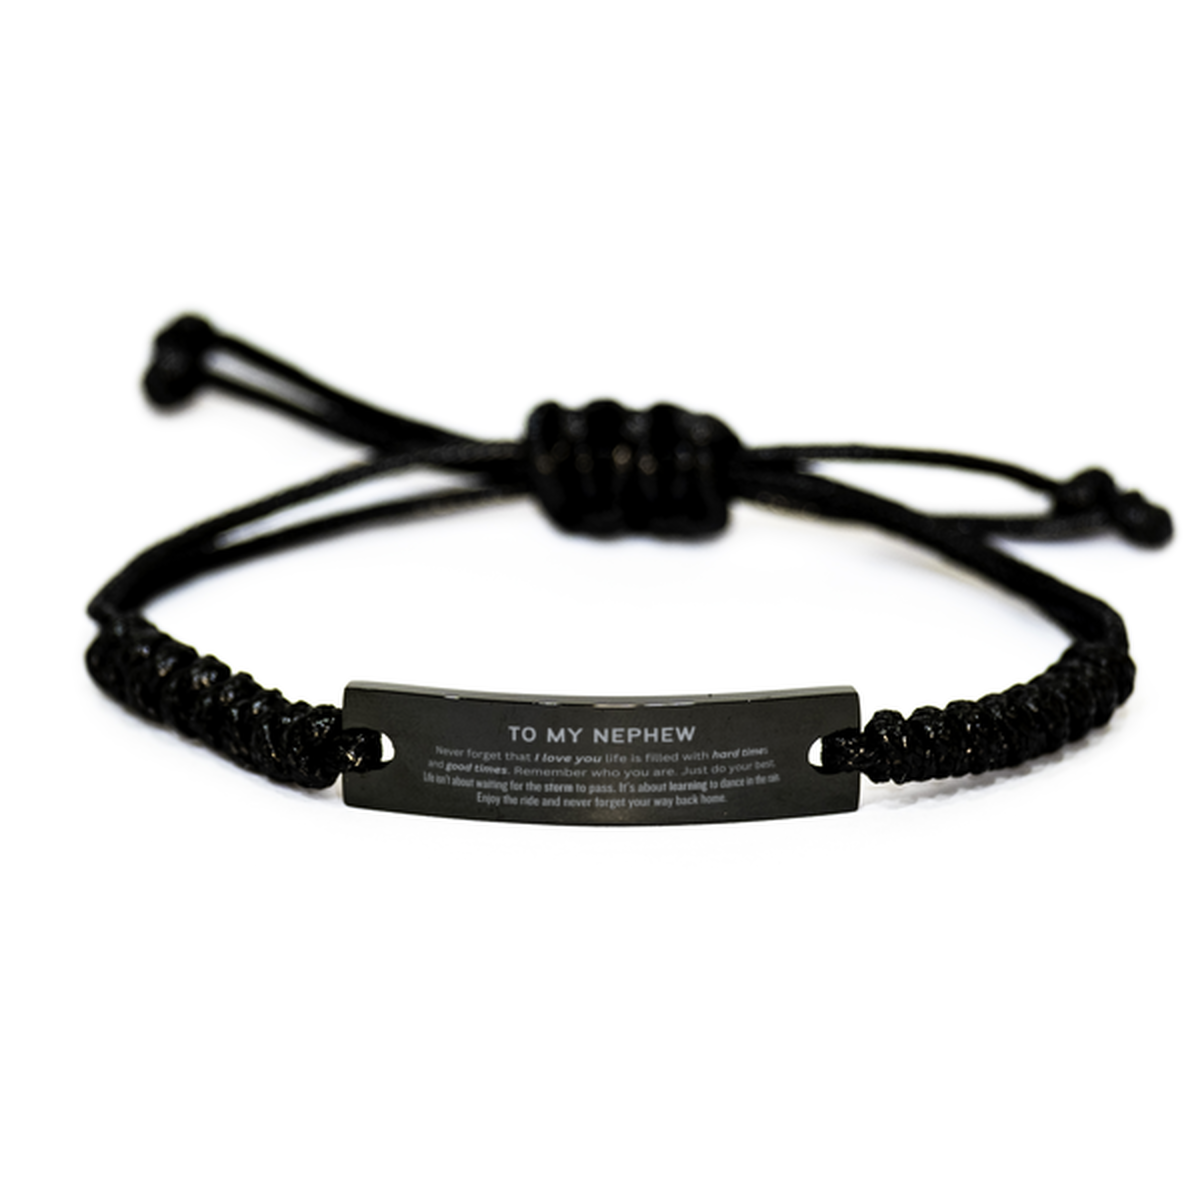 Christmas Nephew Black Rope Bracelet Gifts, To My Nephew Birthday Thank You Gifts For Nephew, Graduation Unique Gifts For Nephew To My Nephew Never forget that I love you life is filled with hard times and good times. Remember who you are. Just do your be